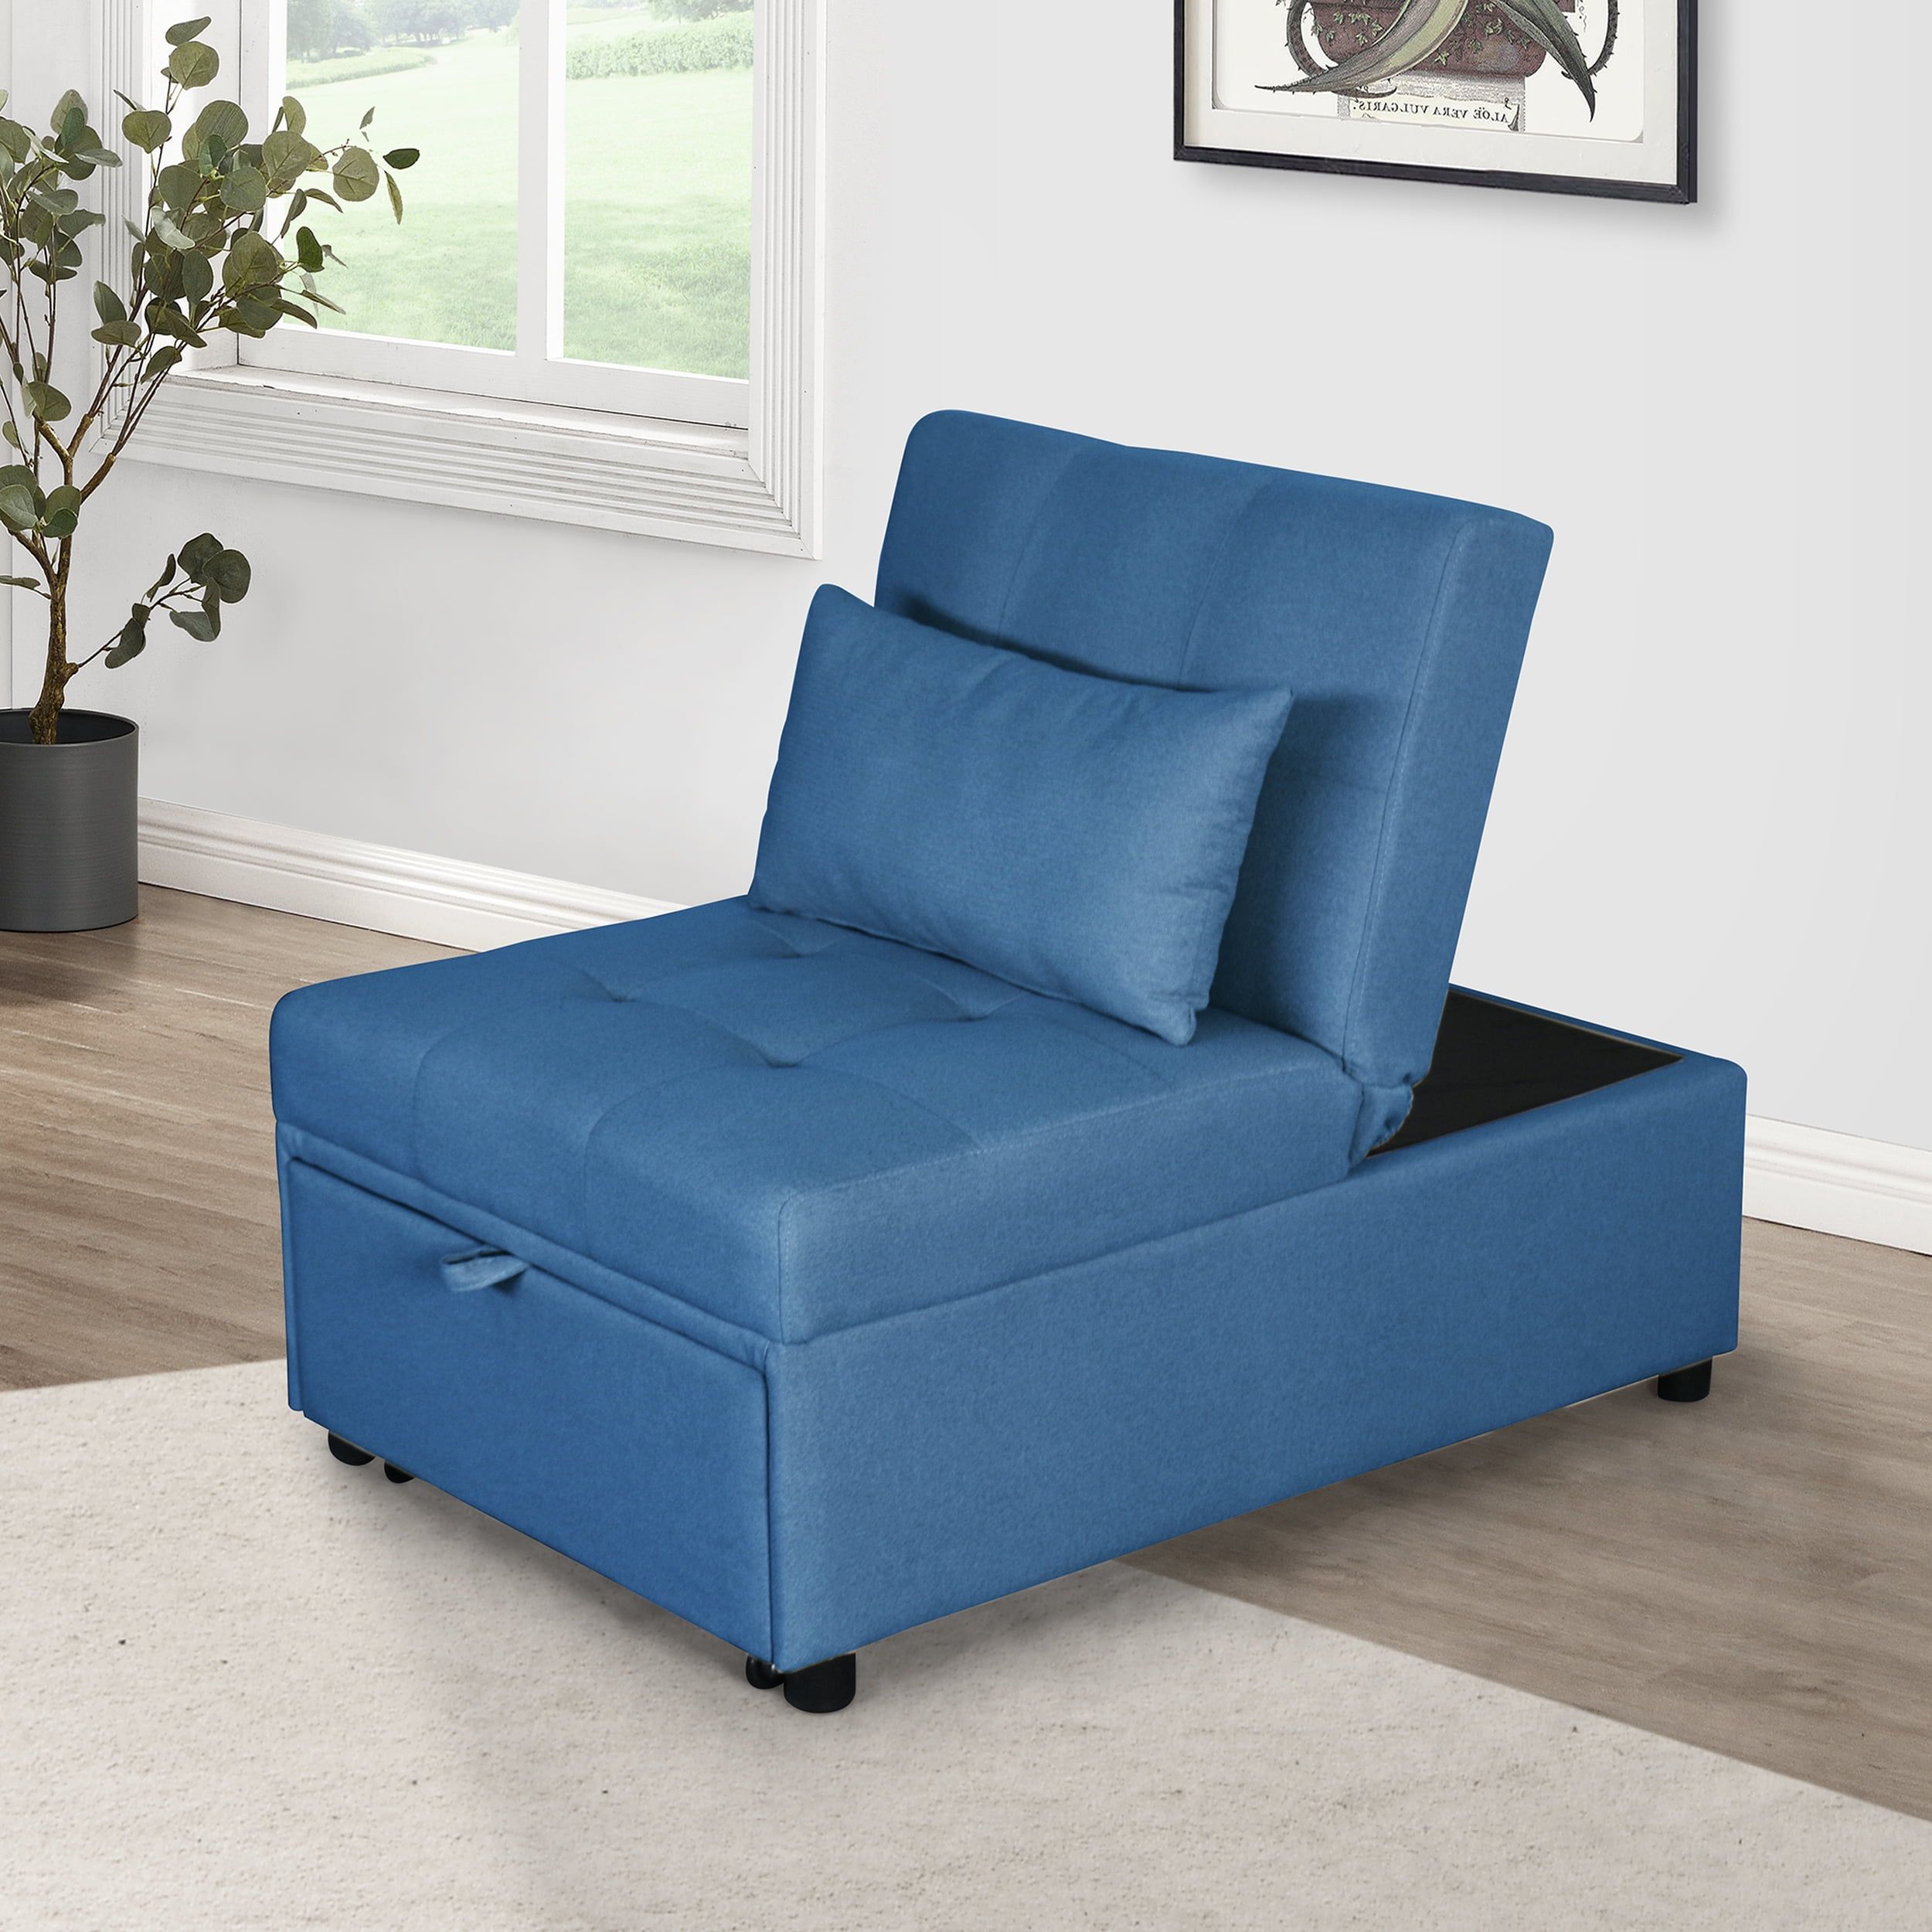 Sofa Bed, Convertible Chair Sleeper Bed, 4 In 1 Multi Function Folding  Ottoman Modern Breathable Fabric Guest Bed With Adjustable Sleeper For  Small Room Apartment (Blue) – Walmart With 4 In 1 Convertible Sleeper Chair Beds (Photo 8 of 15)